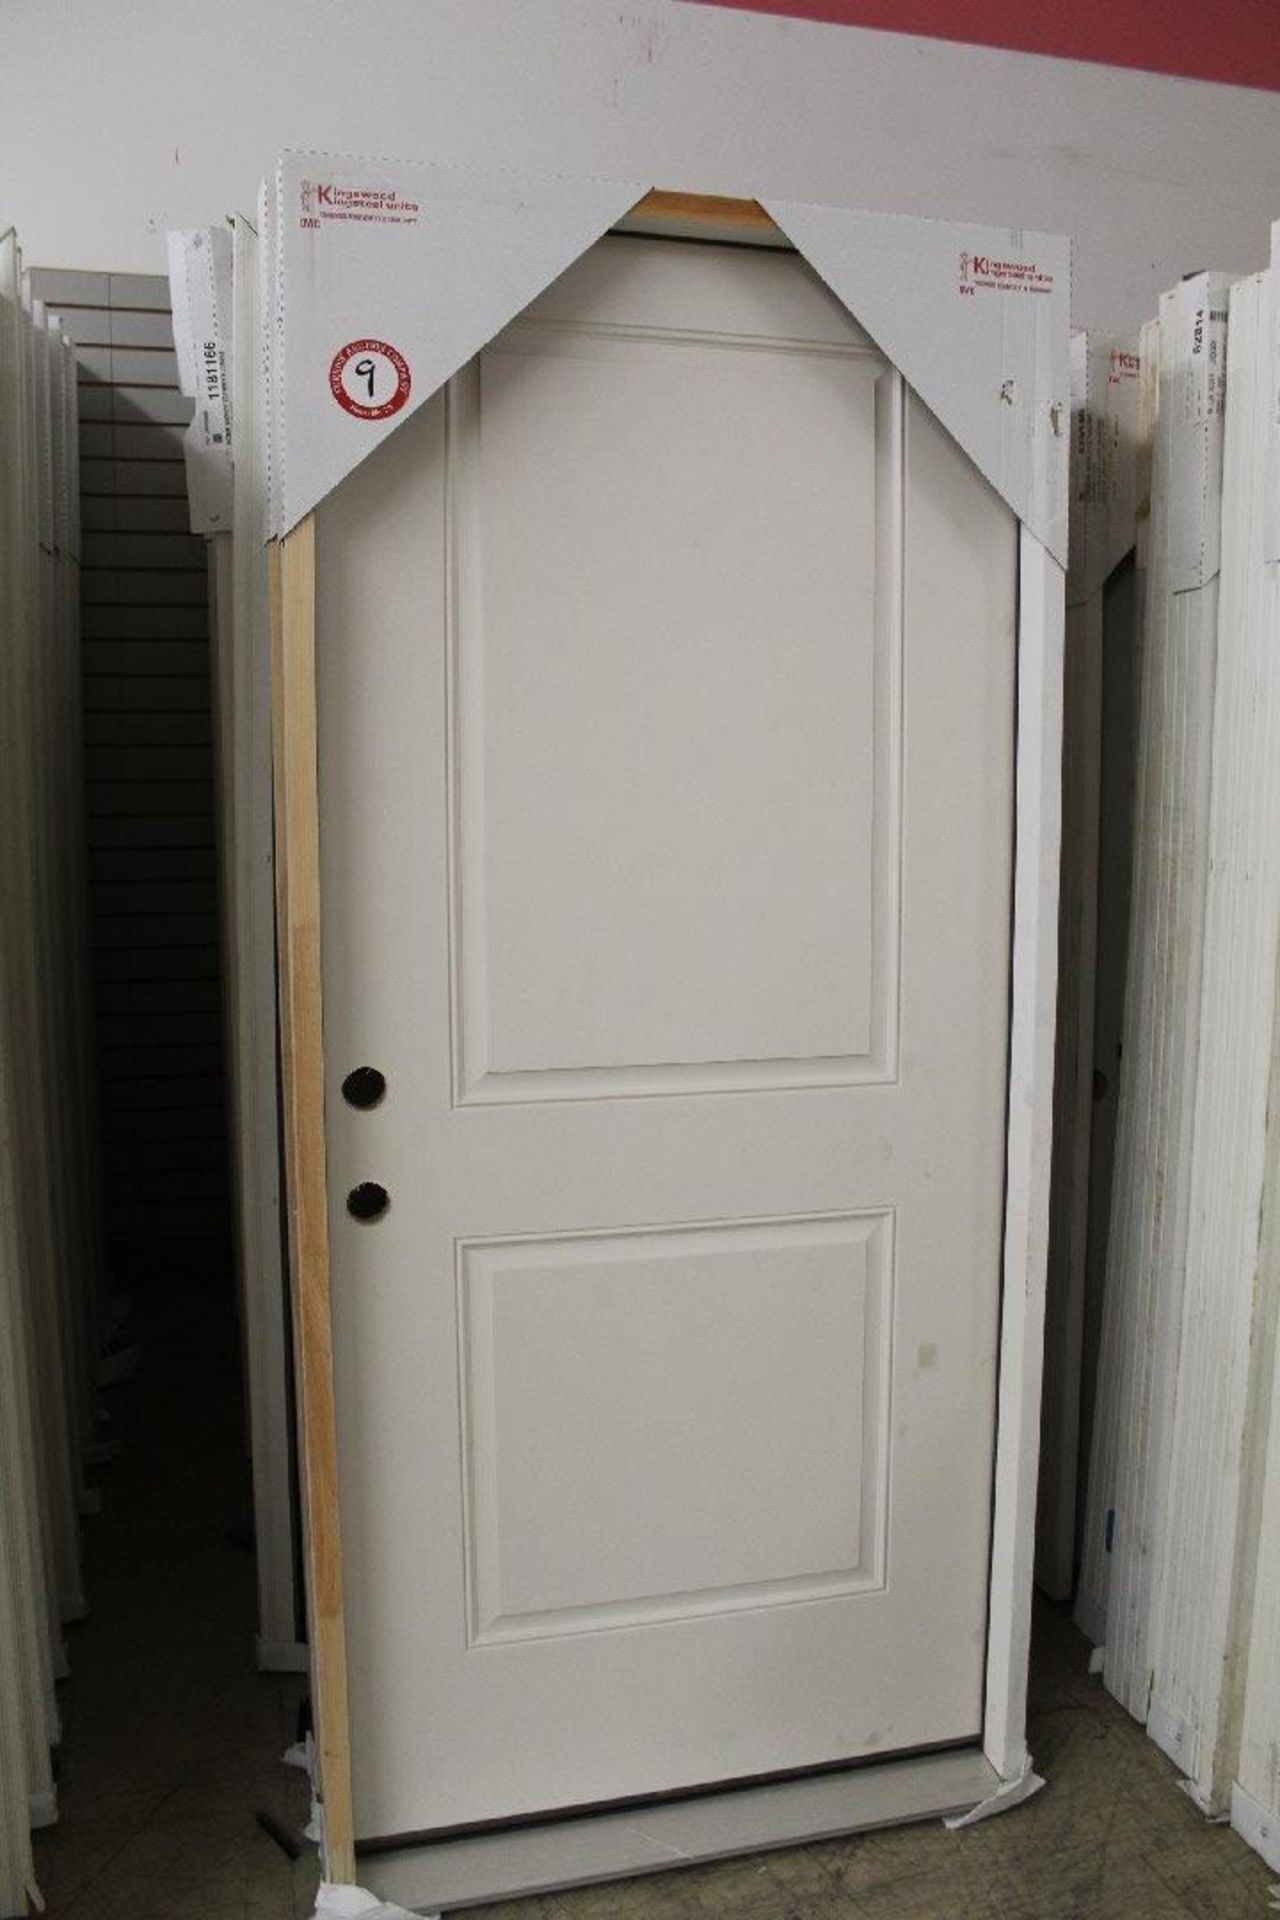 Kingswood 36 Inch Solid Core Transitional doors, Primed White, Quantity of 12 ( 10 left and 2